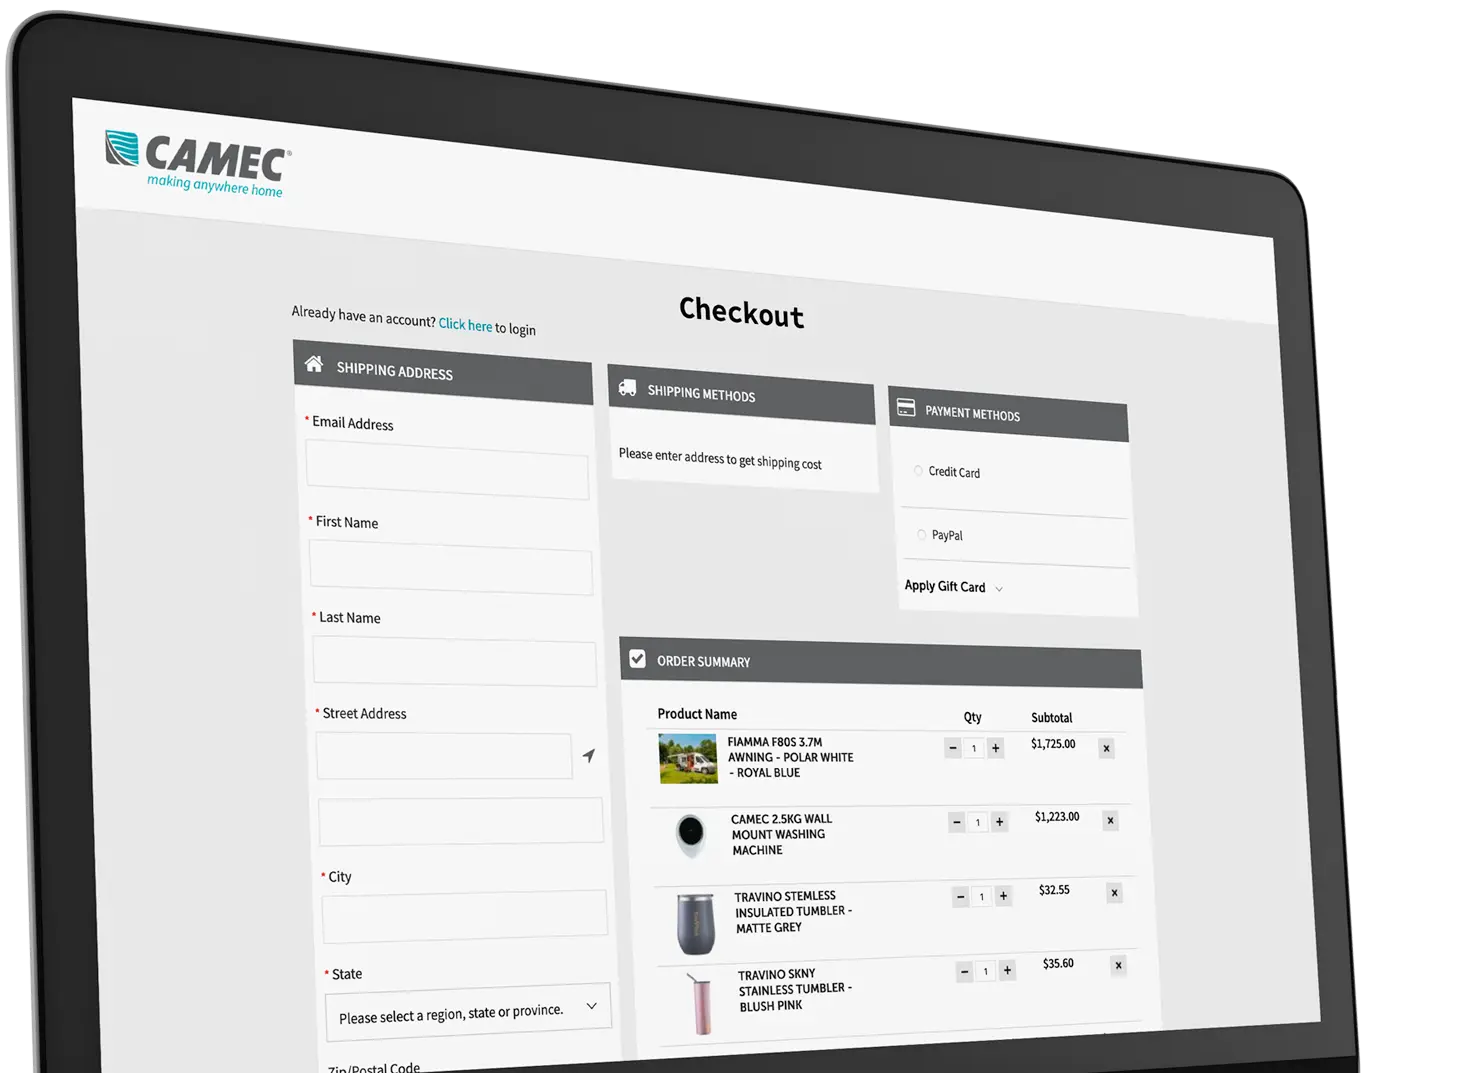 Camec’s redesigned website are responsive to ensure a high level of engagement